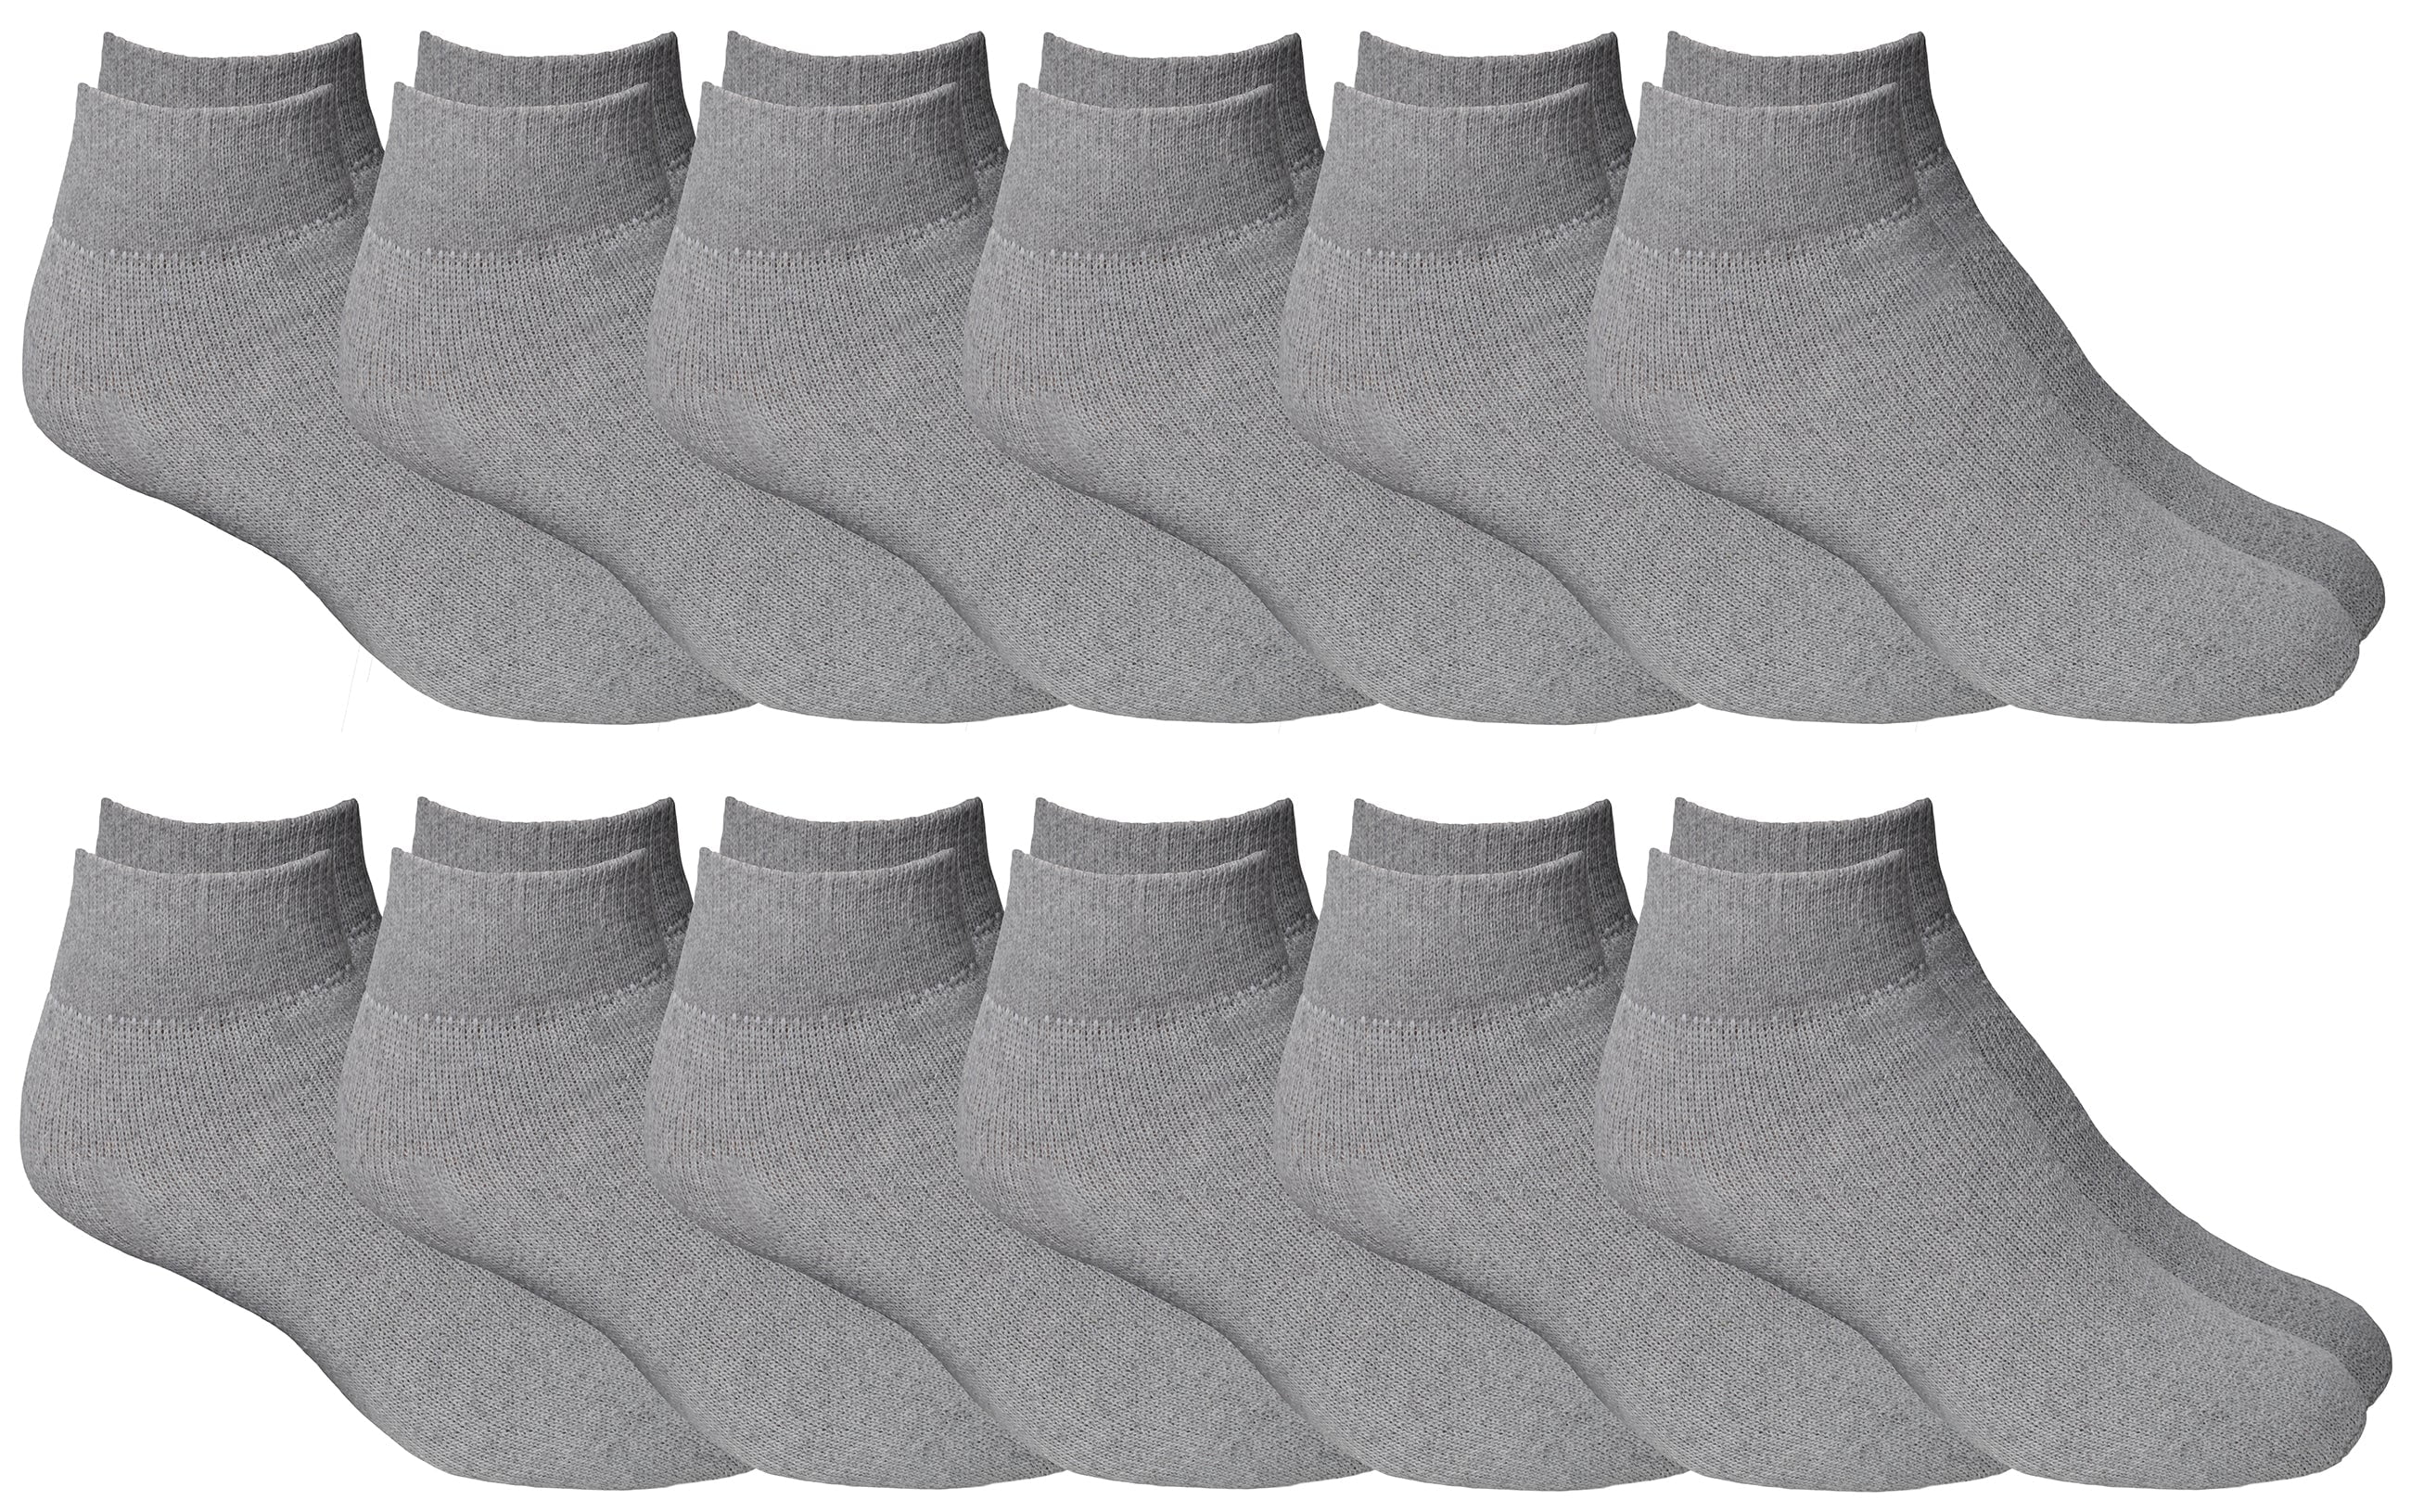 GREAT DEAL New Ankle Sport Socks for Men 12 Pair Size 9-11 and 10-12 